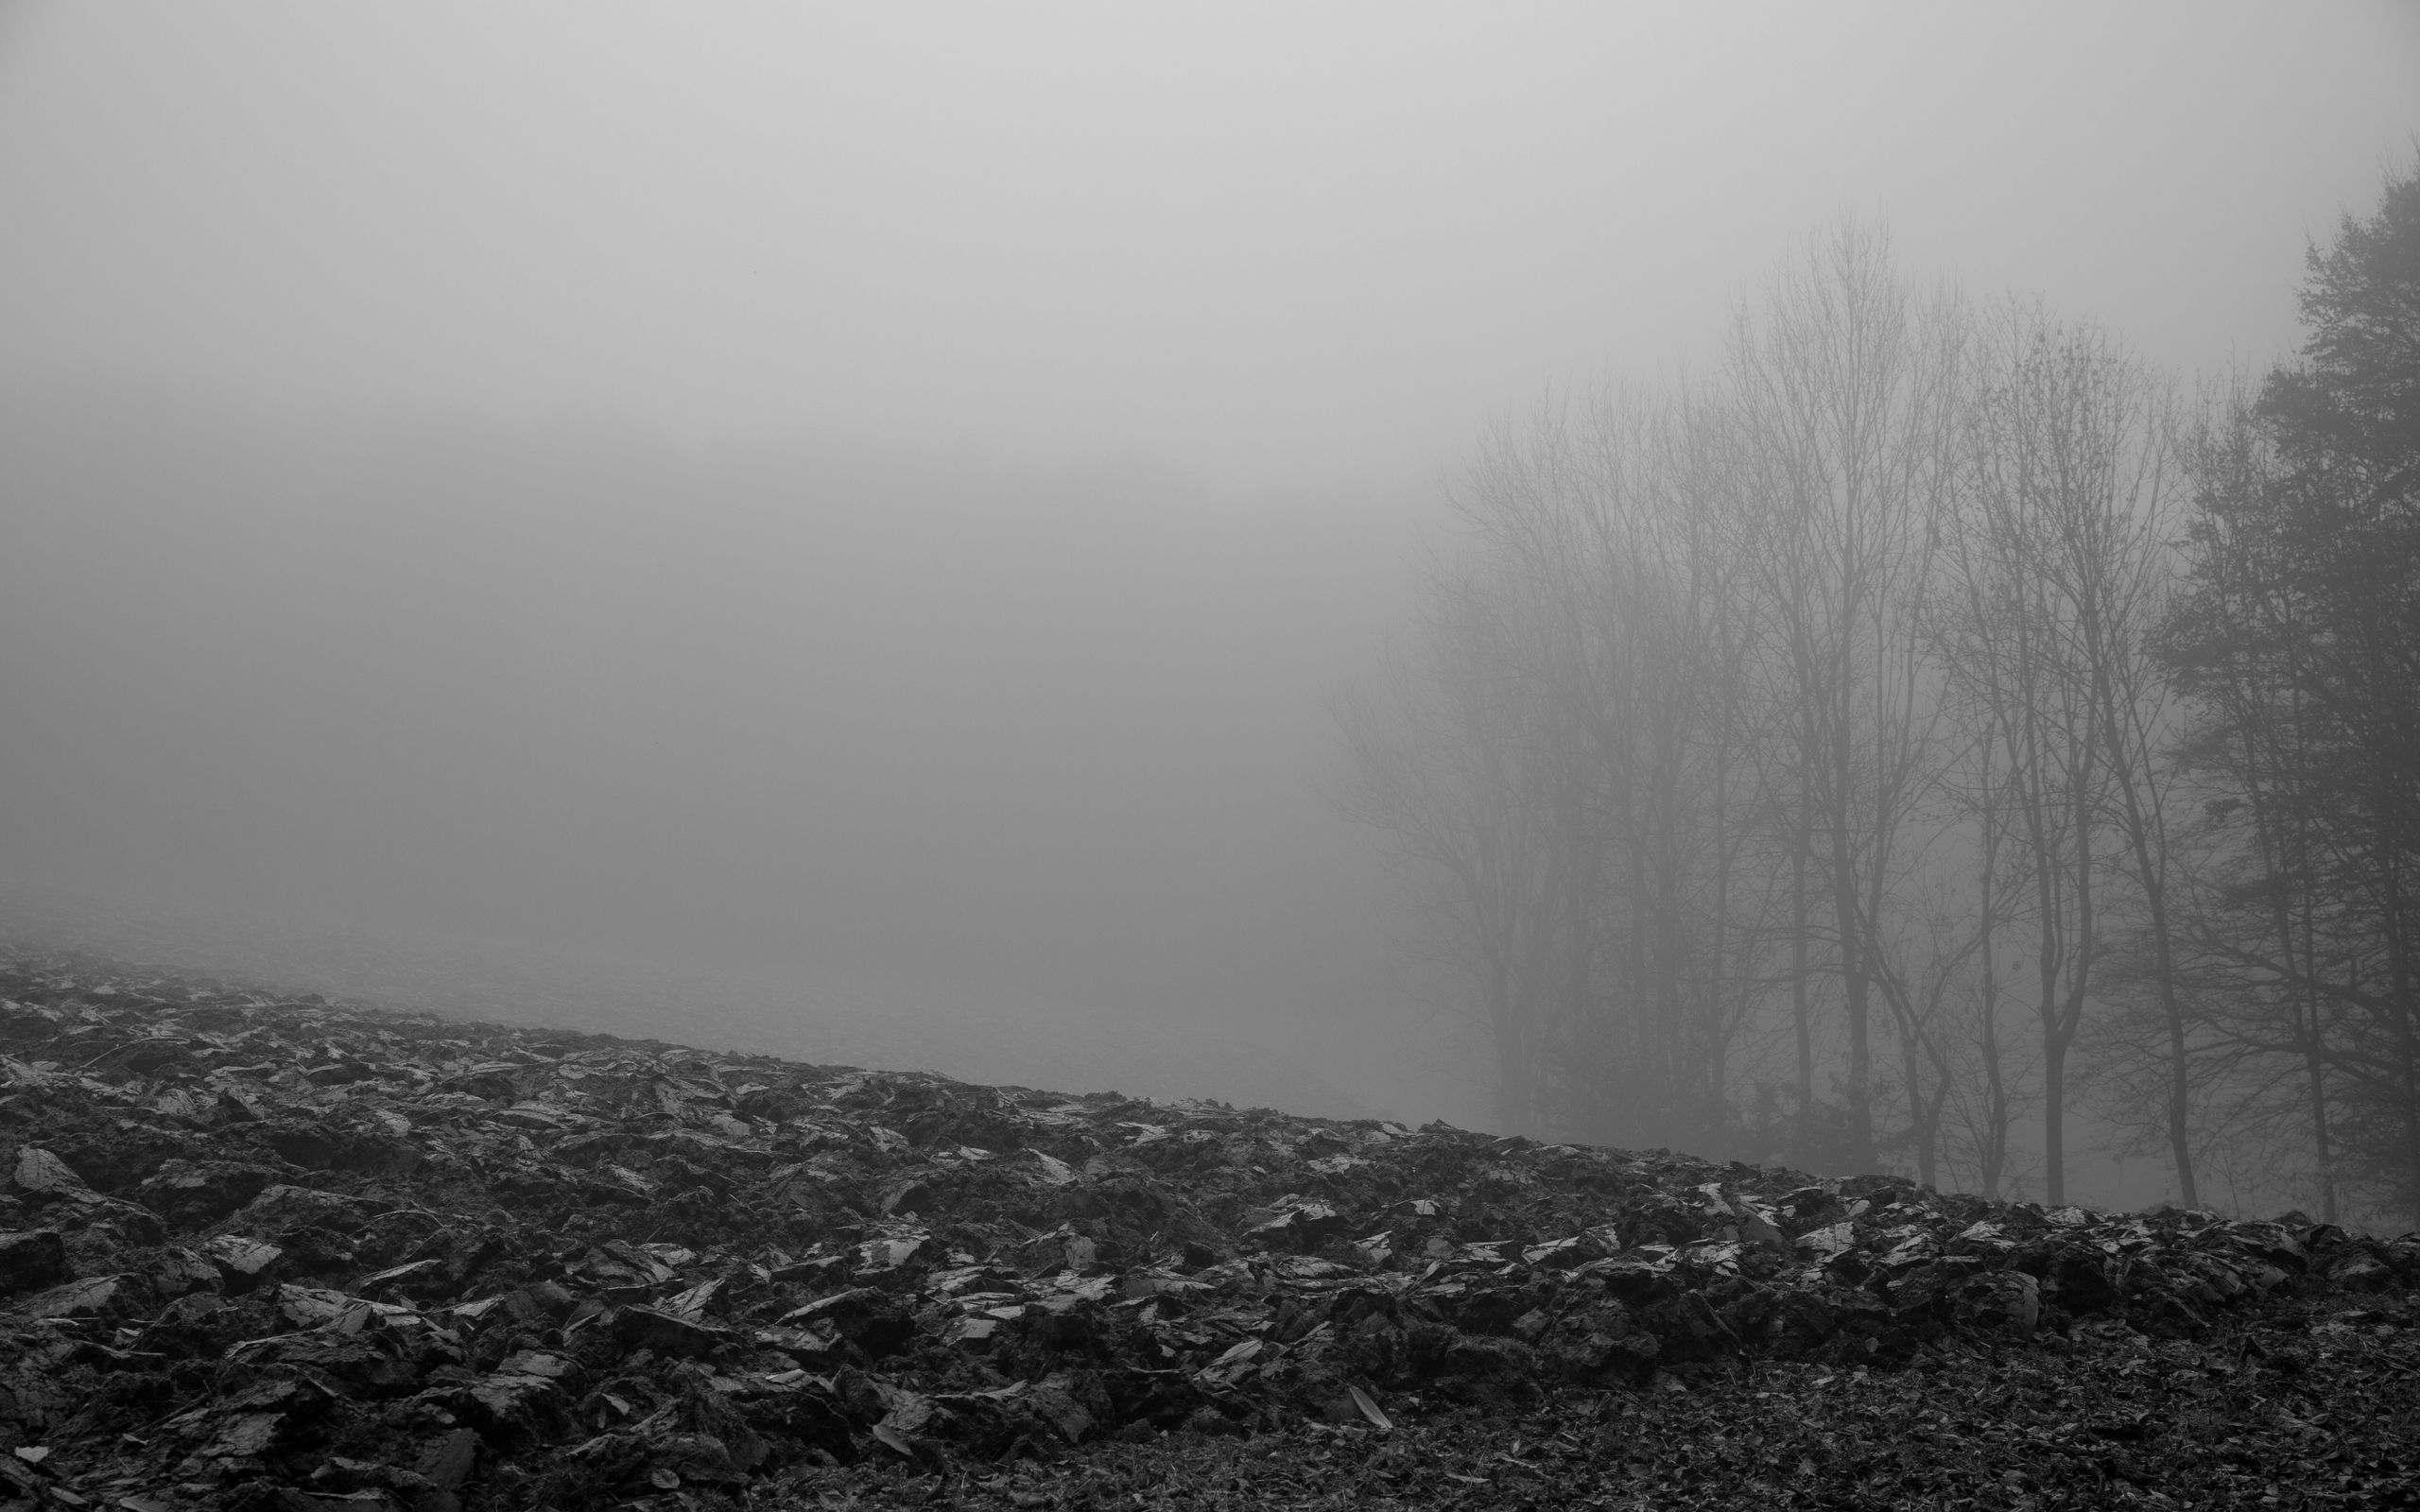 Download wallpaper 2560x1600 trees, silhouettes, fallen leaves, fog ...